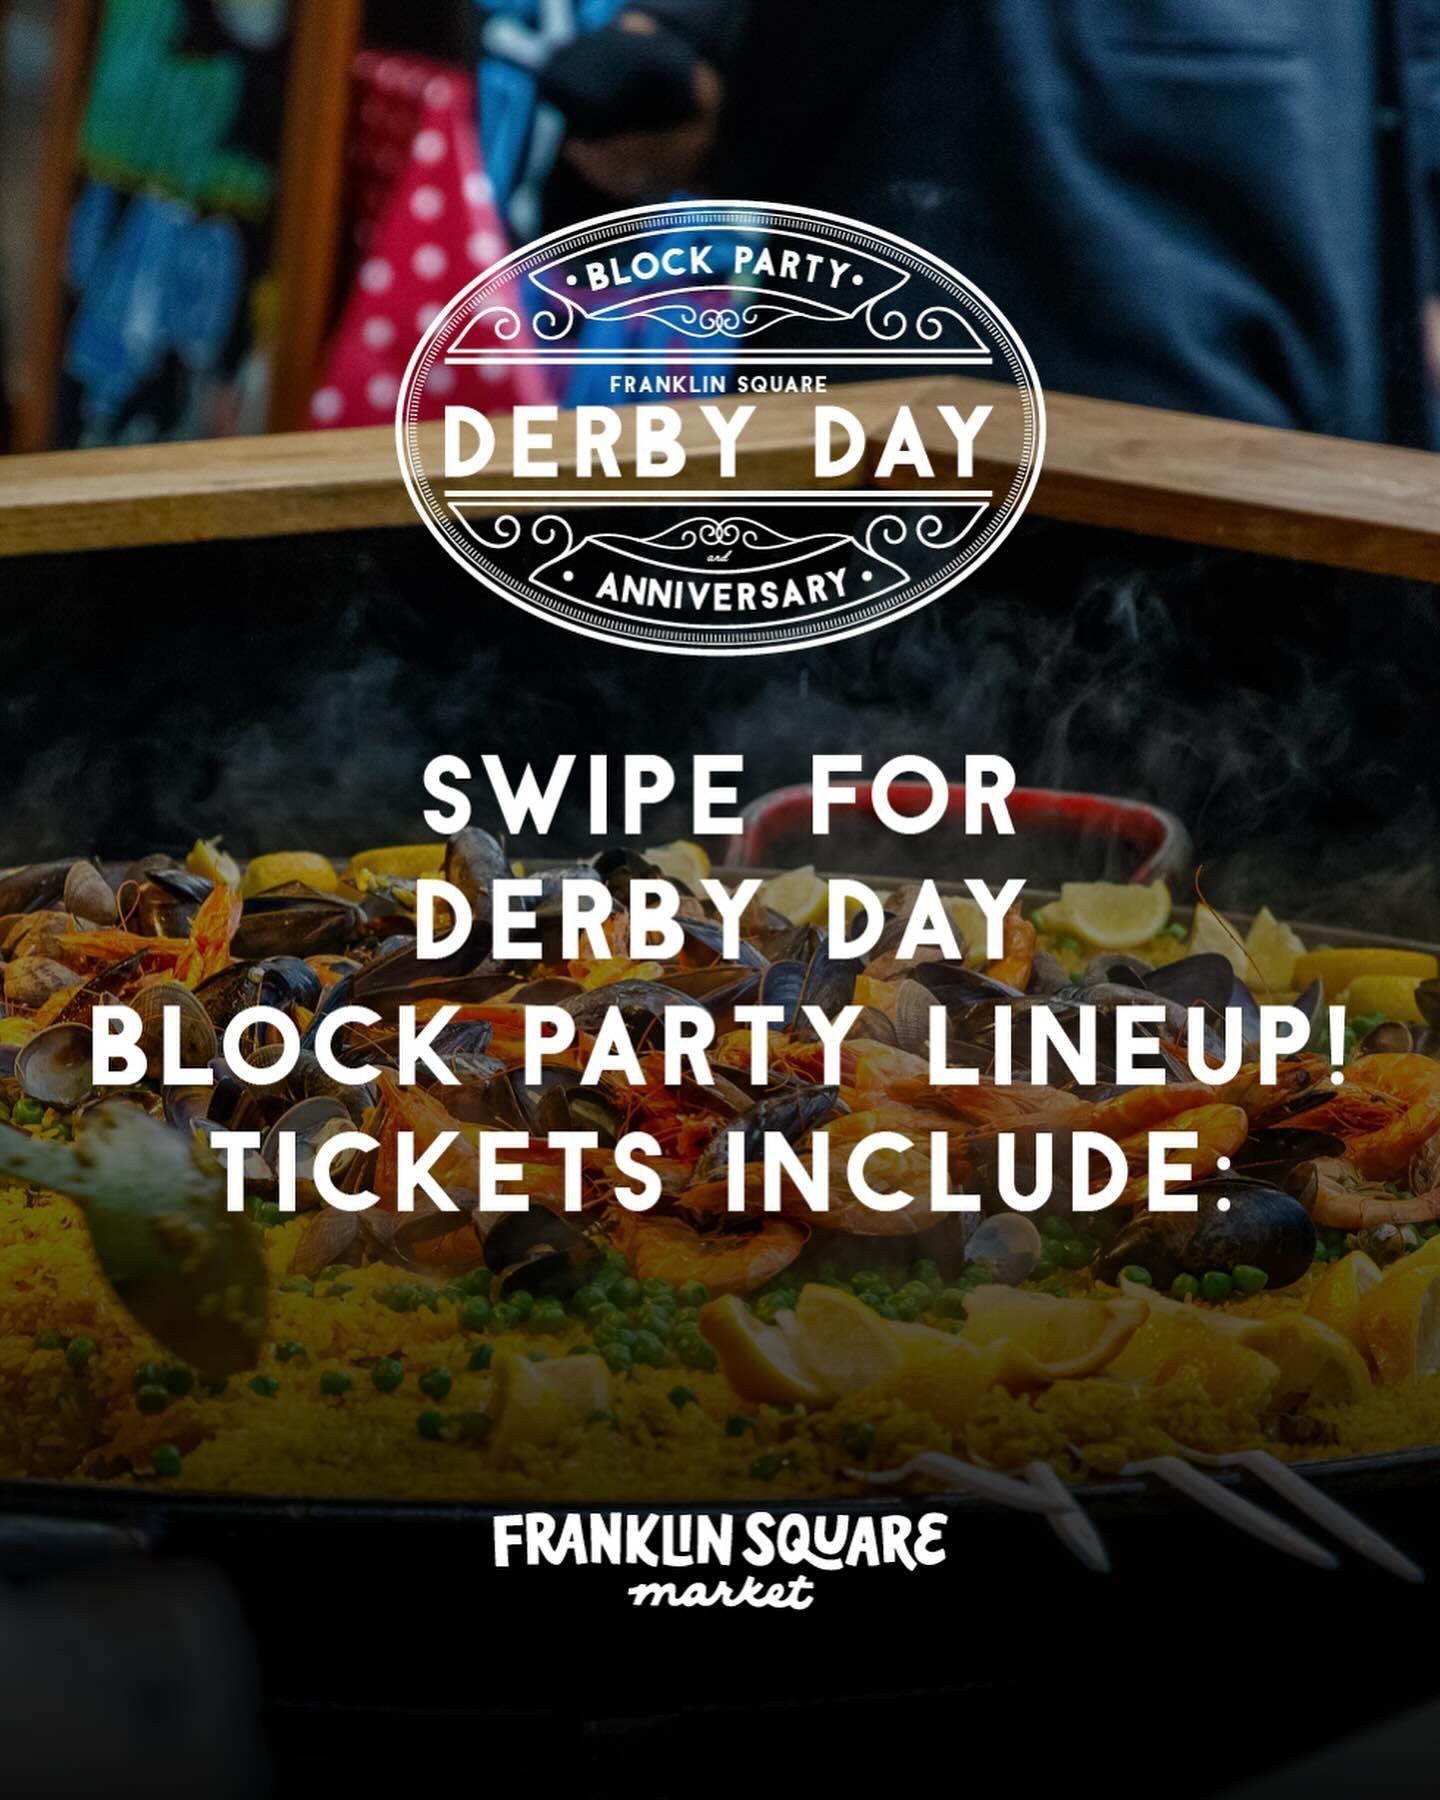 🏇 You're already winning if you're joining us on May 4th for our Derby Day Block Party. Swipe for the full lineup and what your ticket includes. We're so excited for our biggest event ever; celebrating our first year anniversary, the welcoming of Ma